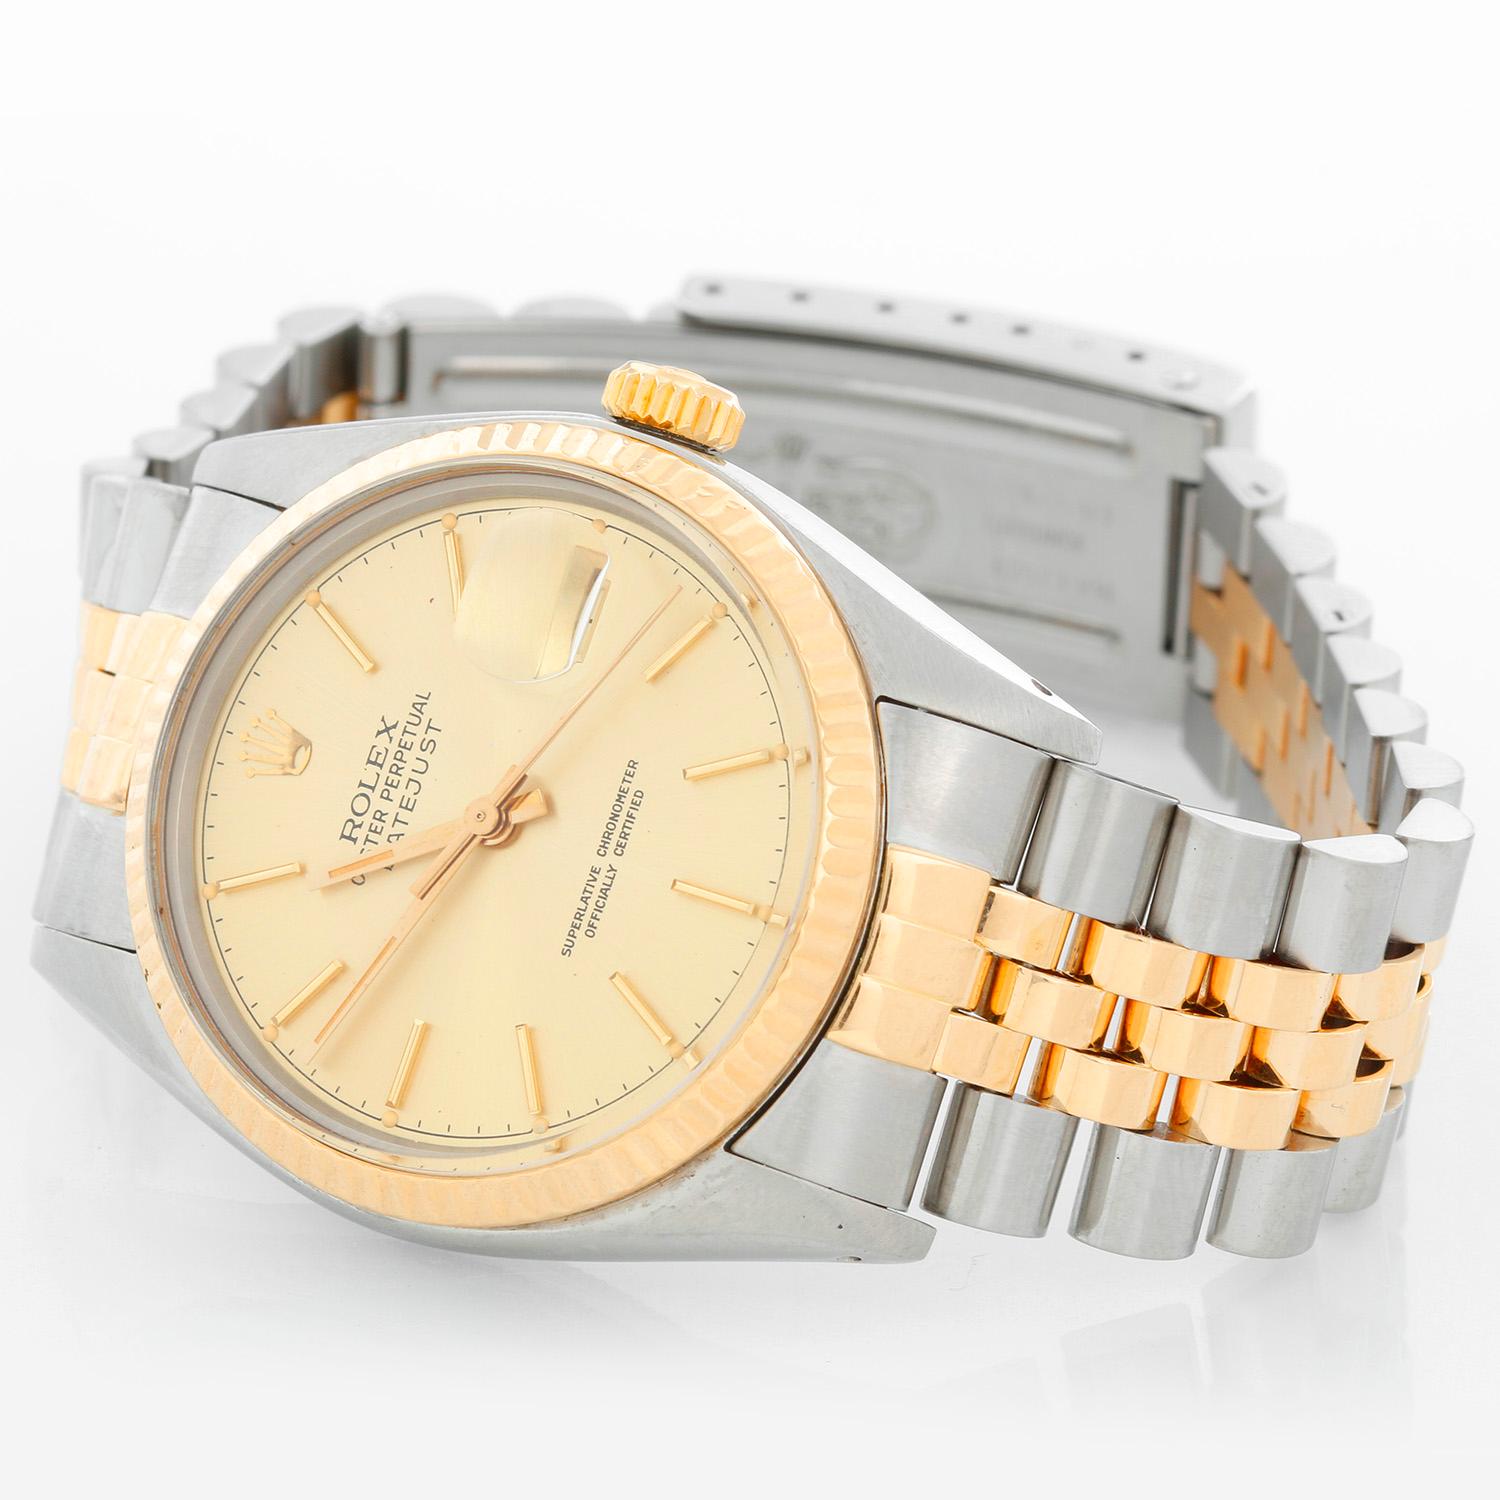 Men's Rolex Datejust 2-Tone Watch 16013 - Automatic winding, 27 jewels, Quickset, acrylic crystal. Stainless steel case with fluted bezel ( 36 mm ). Champagne dial with stick hour markers . Stainless steel and 18k yellow gold Jubilee bracelet.